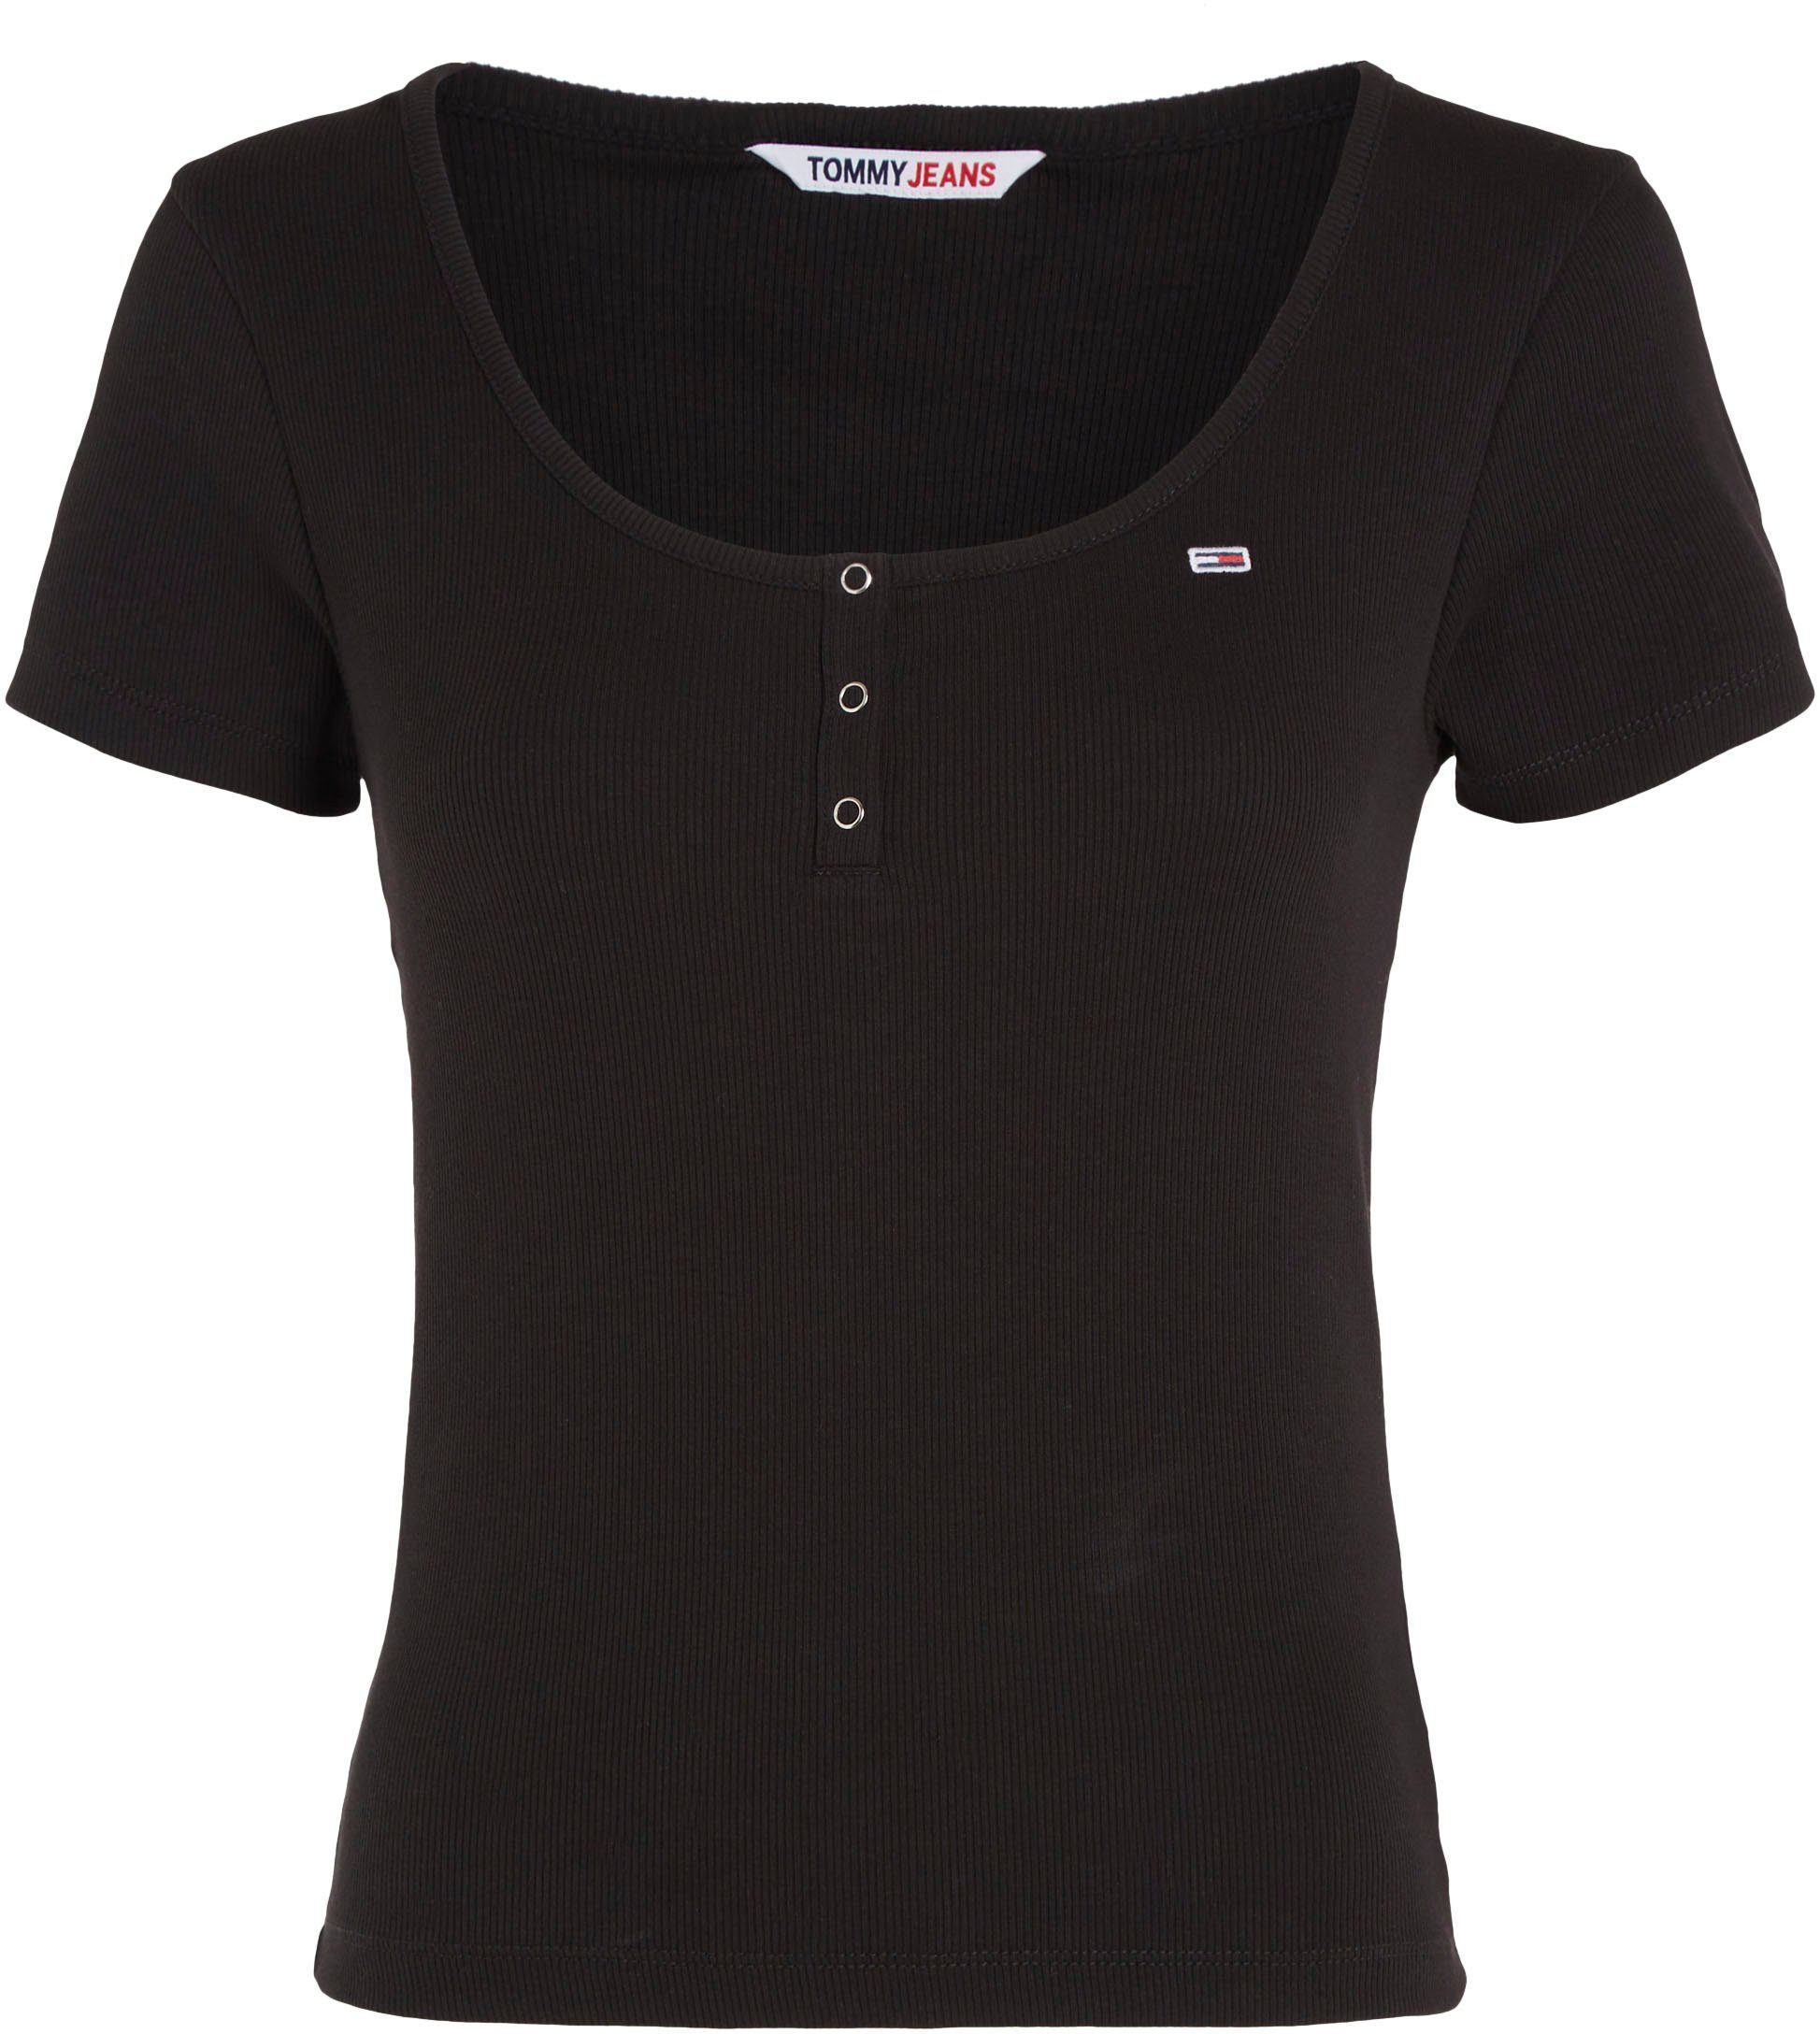 Tommy Jeans RIB Tommy BUTTON Logostickerei T-Shirt mit TJW Jeans C-NECK Black BBY